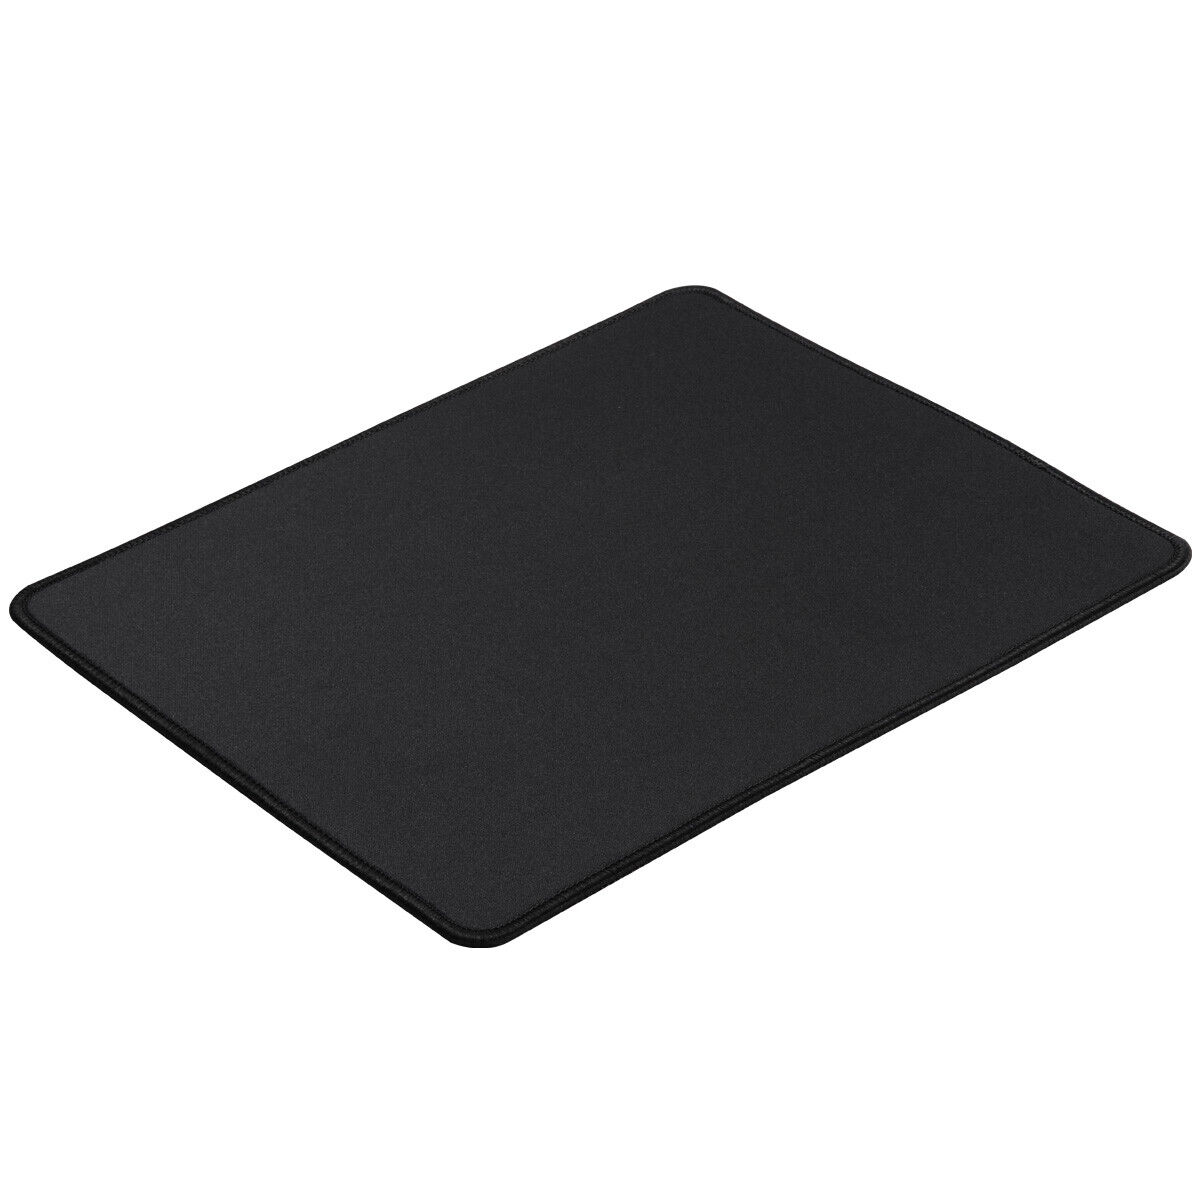 Ultra Thick 3mm Silky Smooth Stitched Edges Mouse Pad/Mat - 10''x12'' Mousepad 